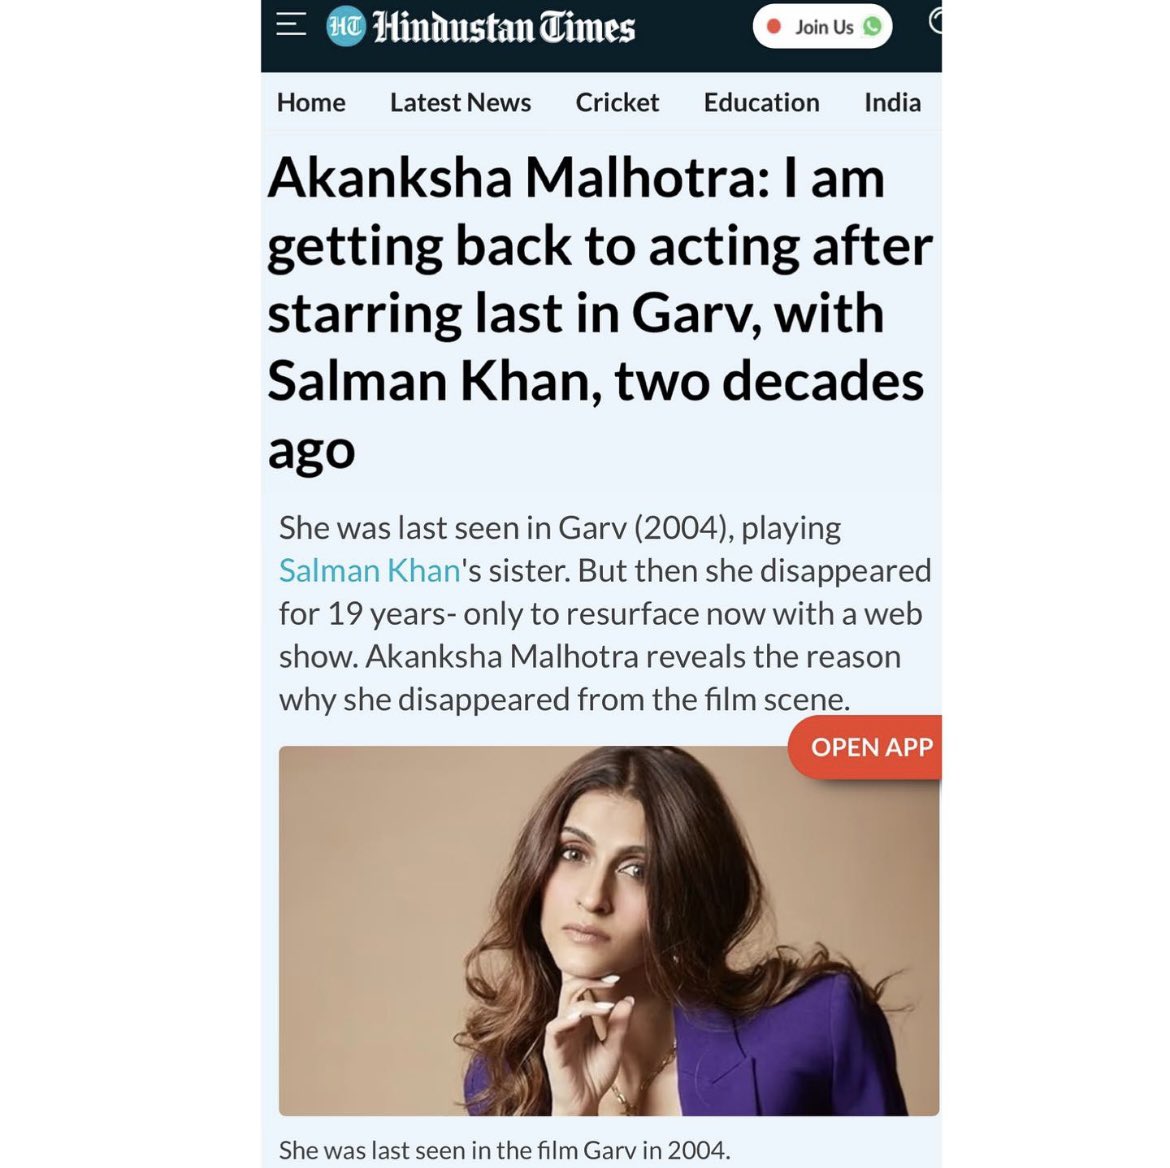 Akanksha Malhotra: I am getting back to acting after starring last in Garv, with Salman Khan, two decades ago

Coverage by @HindustanTimes 

#akankshamalhotra #salmankhan #garv #hindustantimes #ht